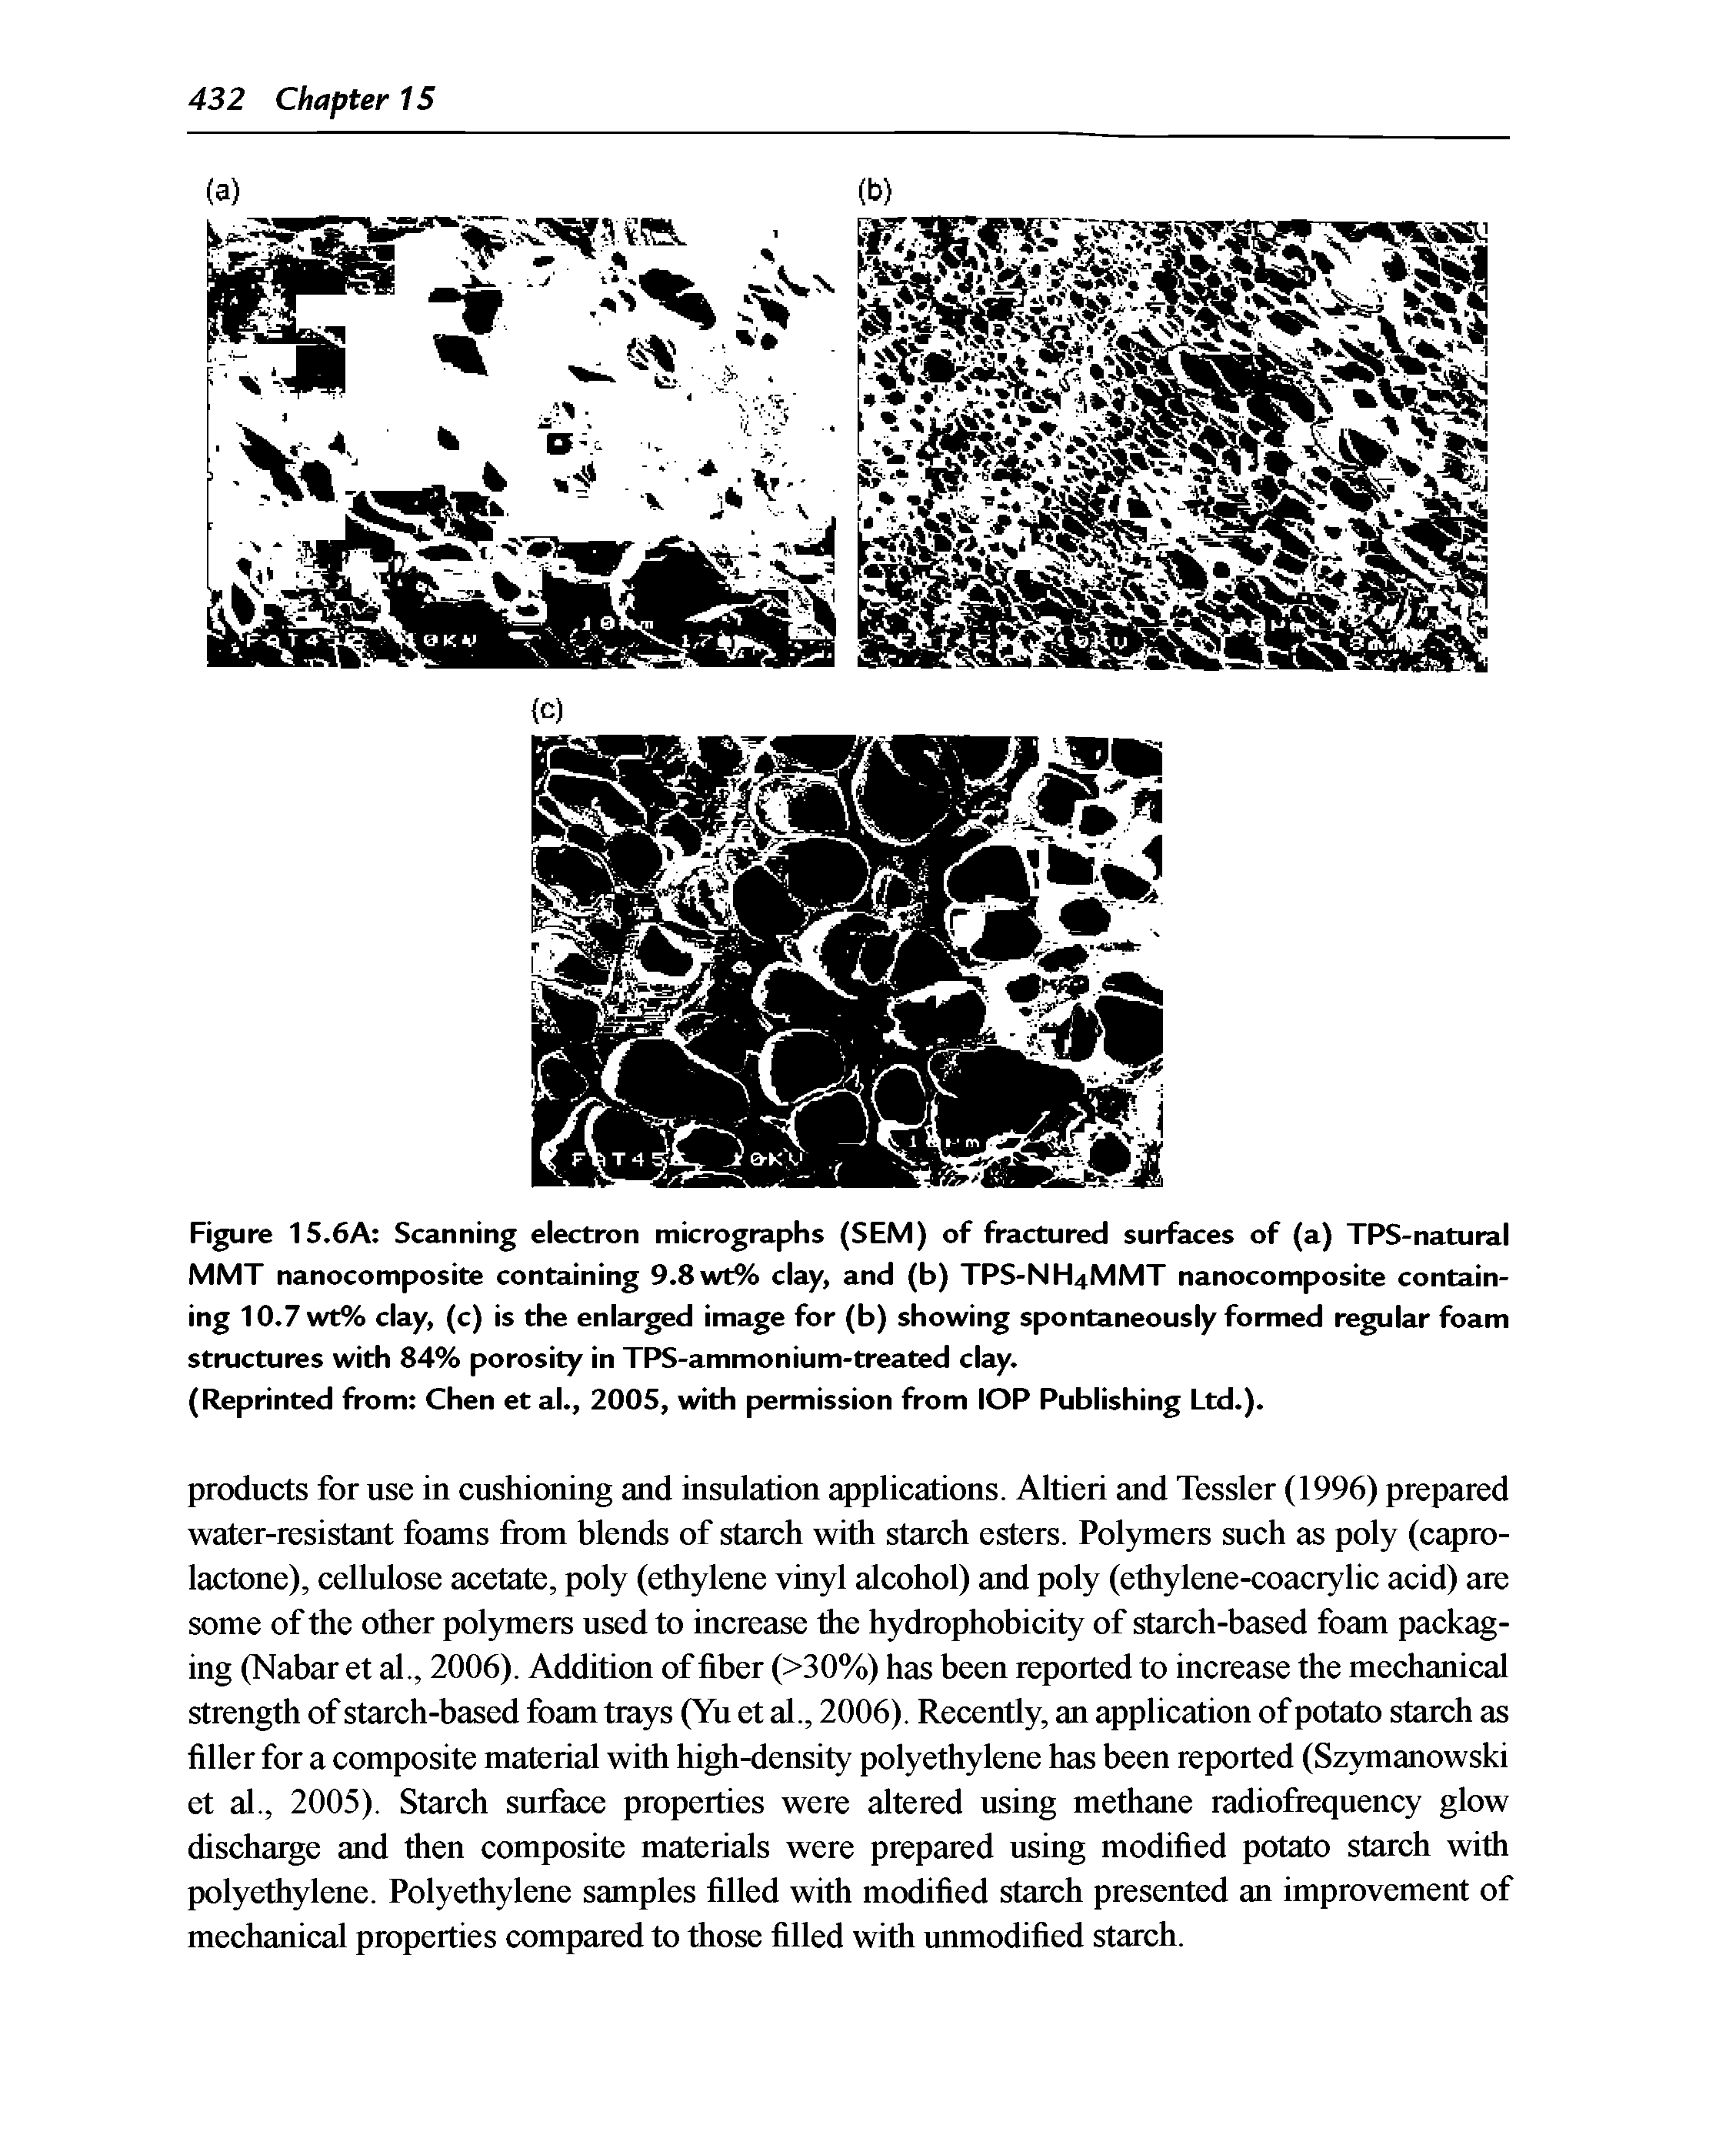 Figure 15.6A Scanning electron micrographs (SEM) of fractured surfaces of (a) TPS-natural MMT nanocomposite containing 9.8 wt% clay, and (b) TPS-NH4MMT nanocomposite containing 10.7 wt% clay, (c) is the enlarged image for (b) showing spontaneously formed regular foam structures with 84% porosity in TPS-ammonium-treated clay.